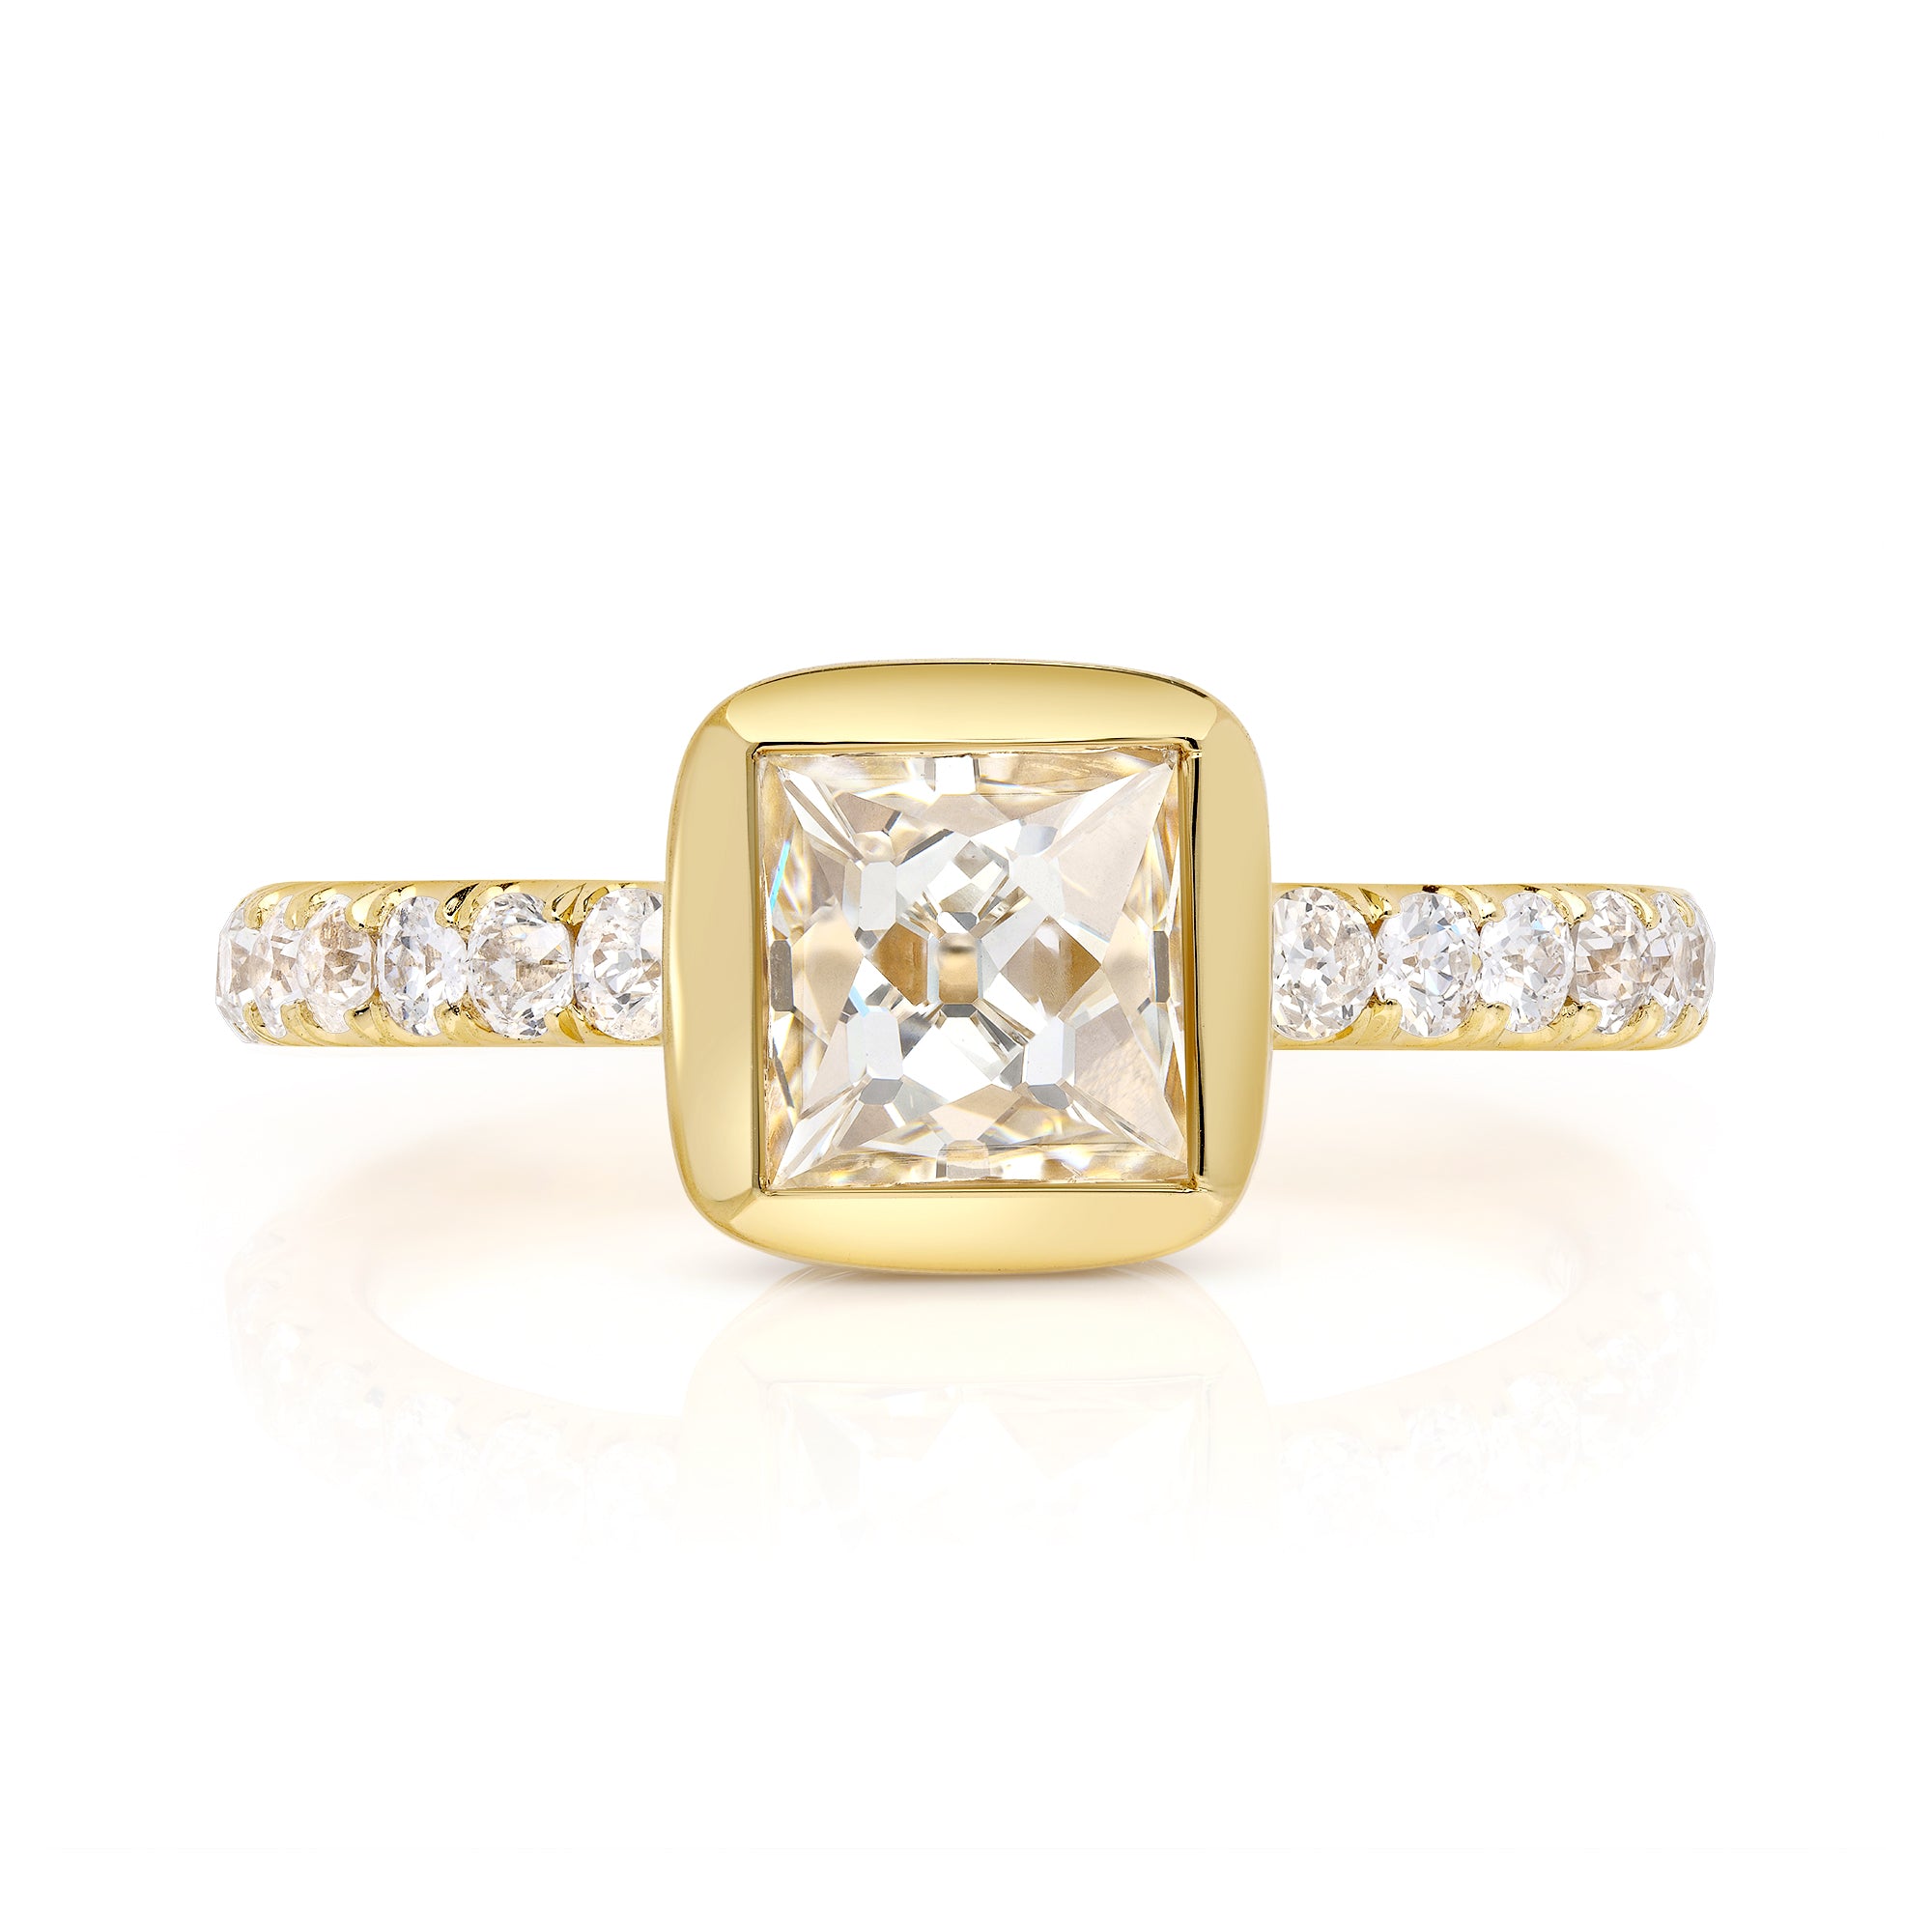 SINGLE STONE KARINA RING featuring 1.39ct J/VS1 GIA certified French cut diamond with 0.43ctw old European cut accent diamonds set in a handcrafted 18K yellow gold mounting.